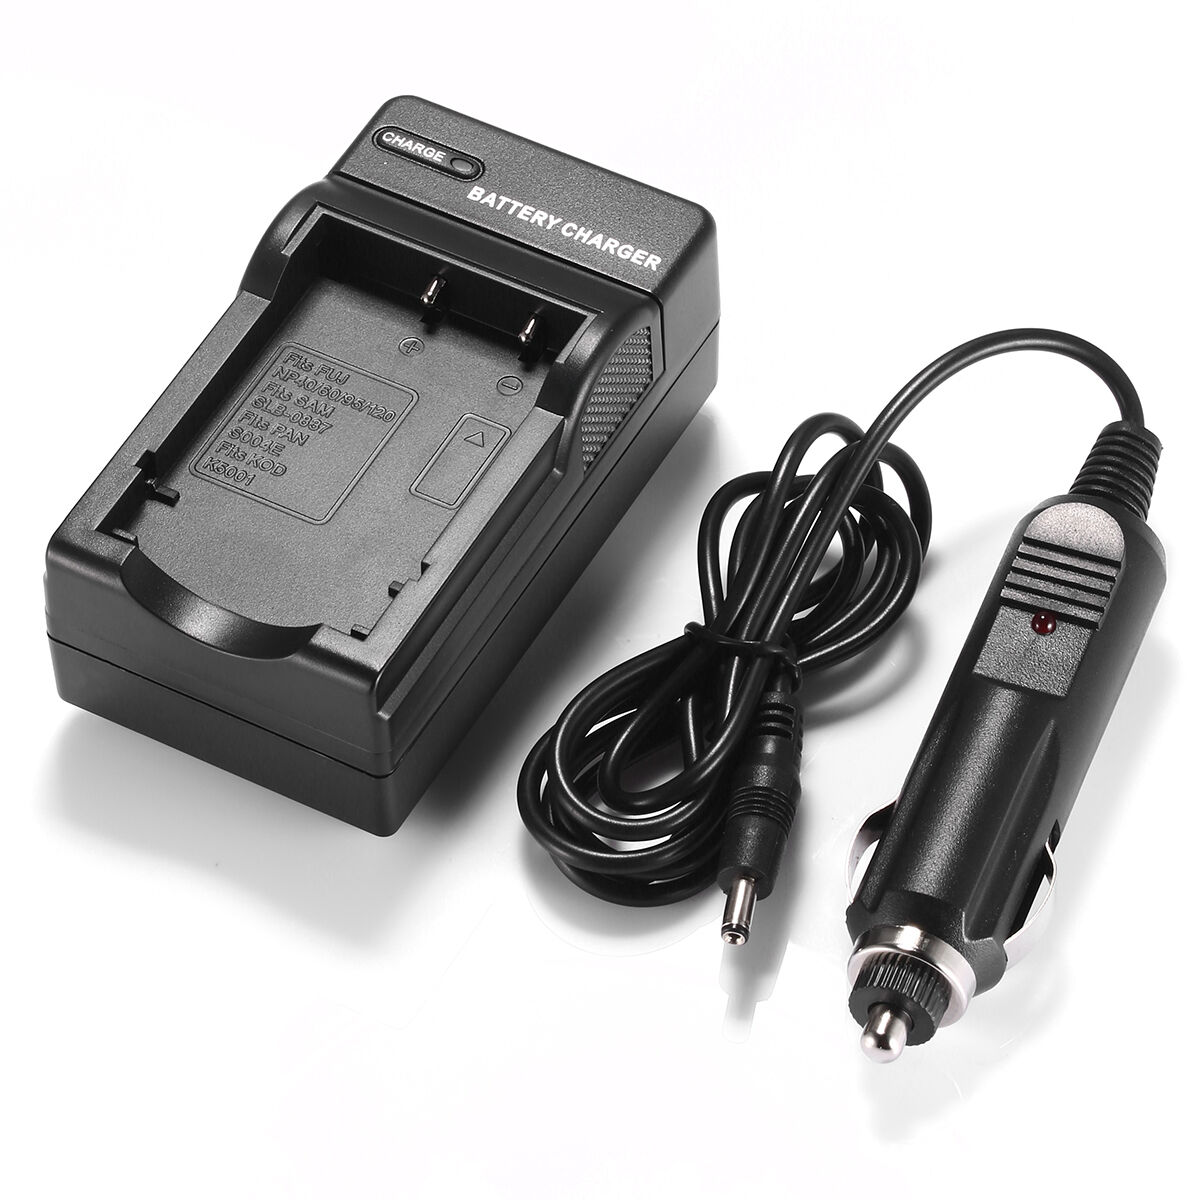 CASIO Exilim Zoom EX-Z85 battery charger